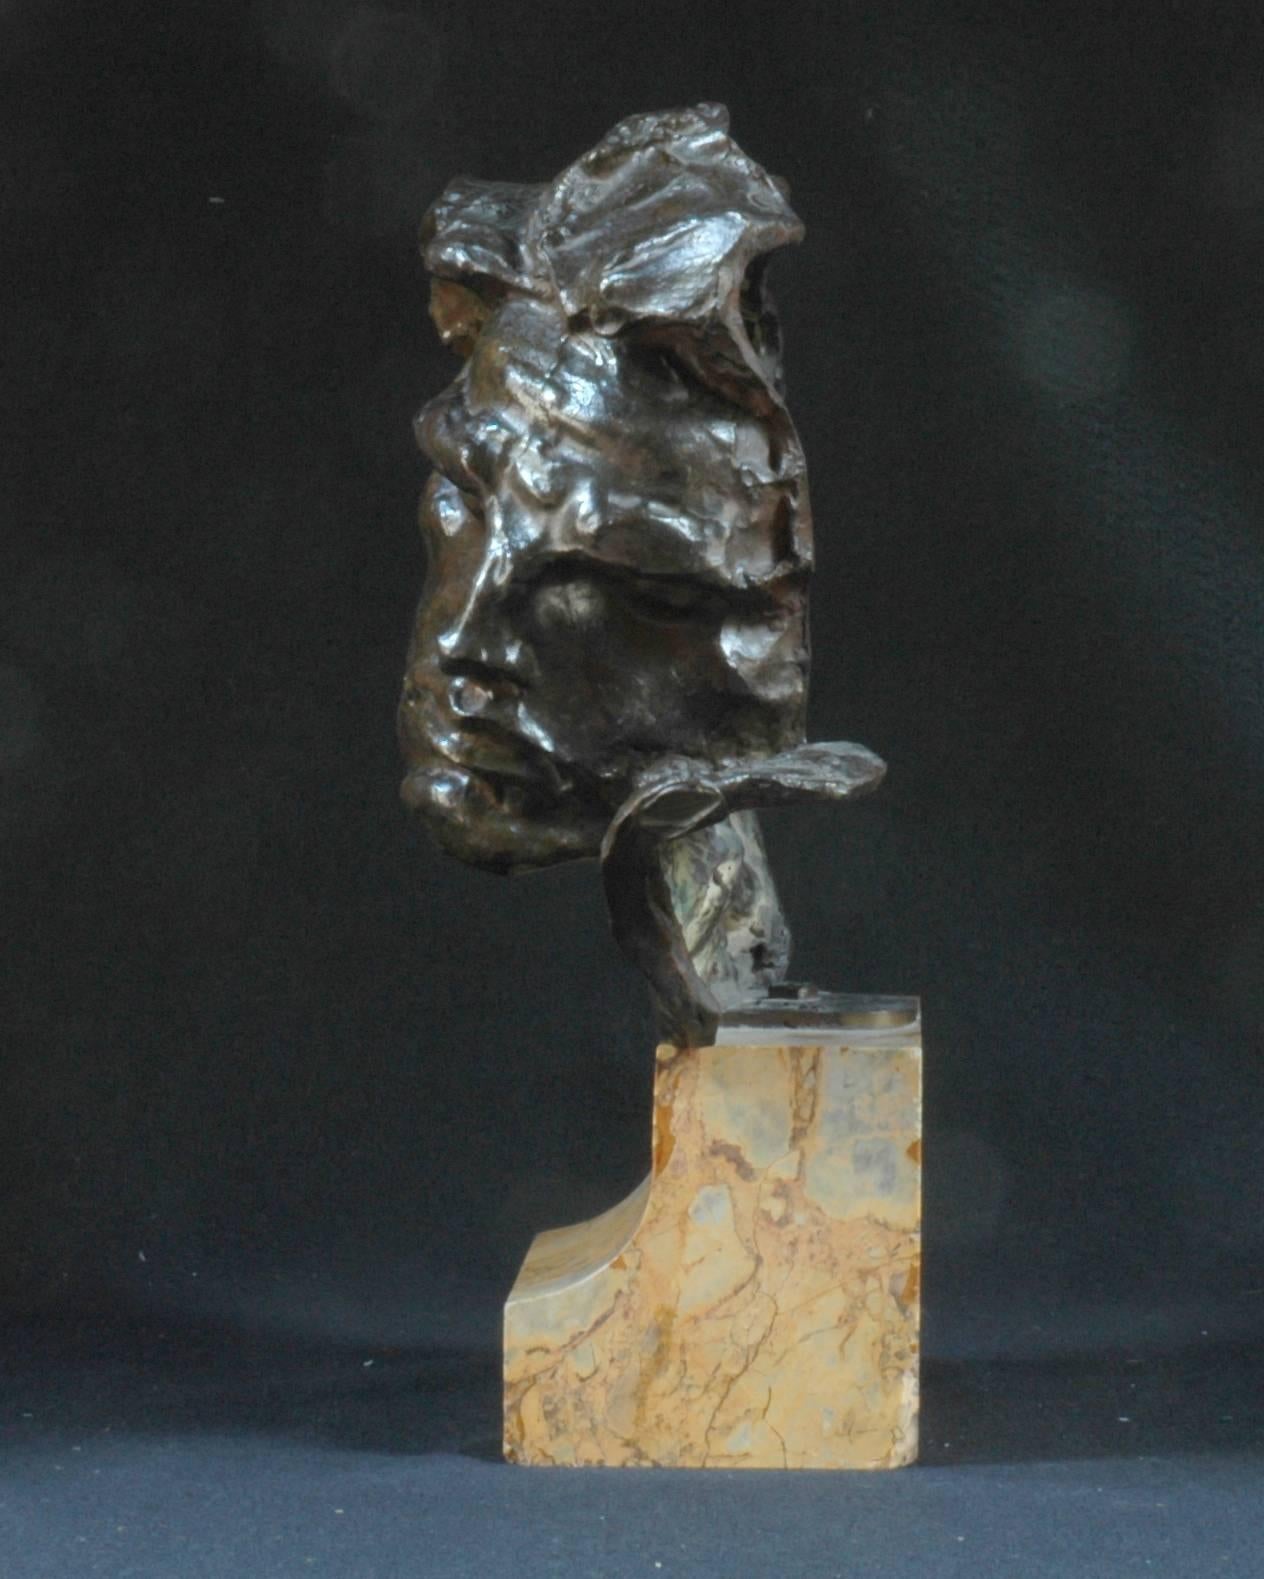 19th century bronze bust of Nijinsky, the famous Russian dancer sits upon a marble base.

Sculpture depicts the movement and energy of the famous dancer.

Bust is signed.

